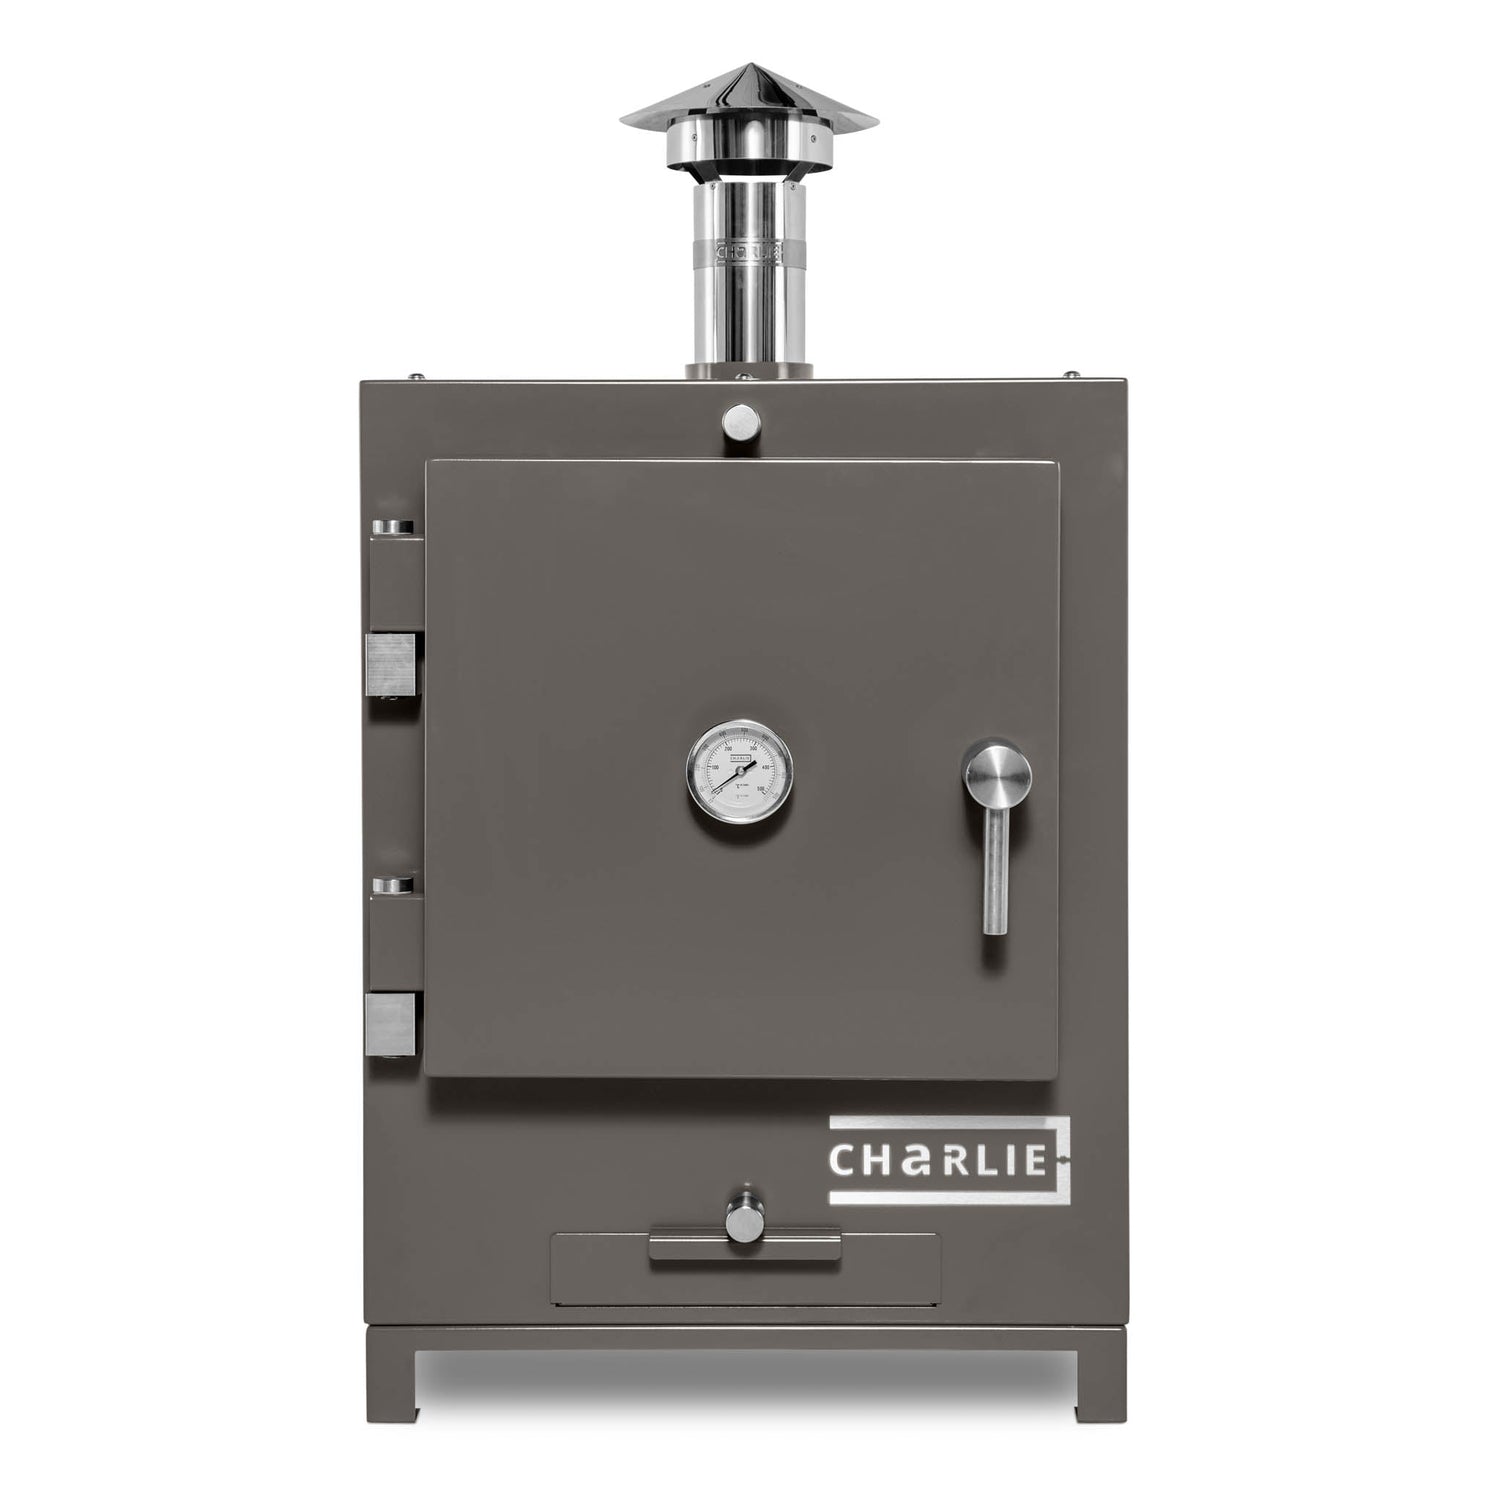 Cheeky Charlie Charcoal Tabletop Oven - Porcini - Charlie Oven